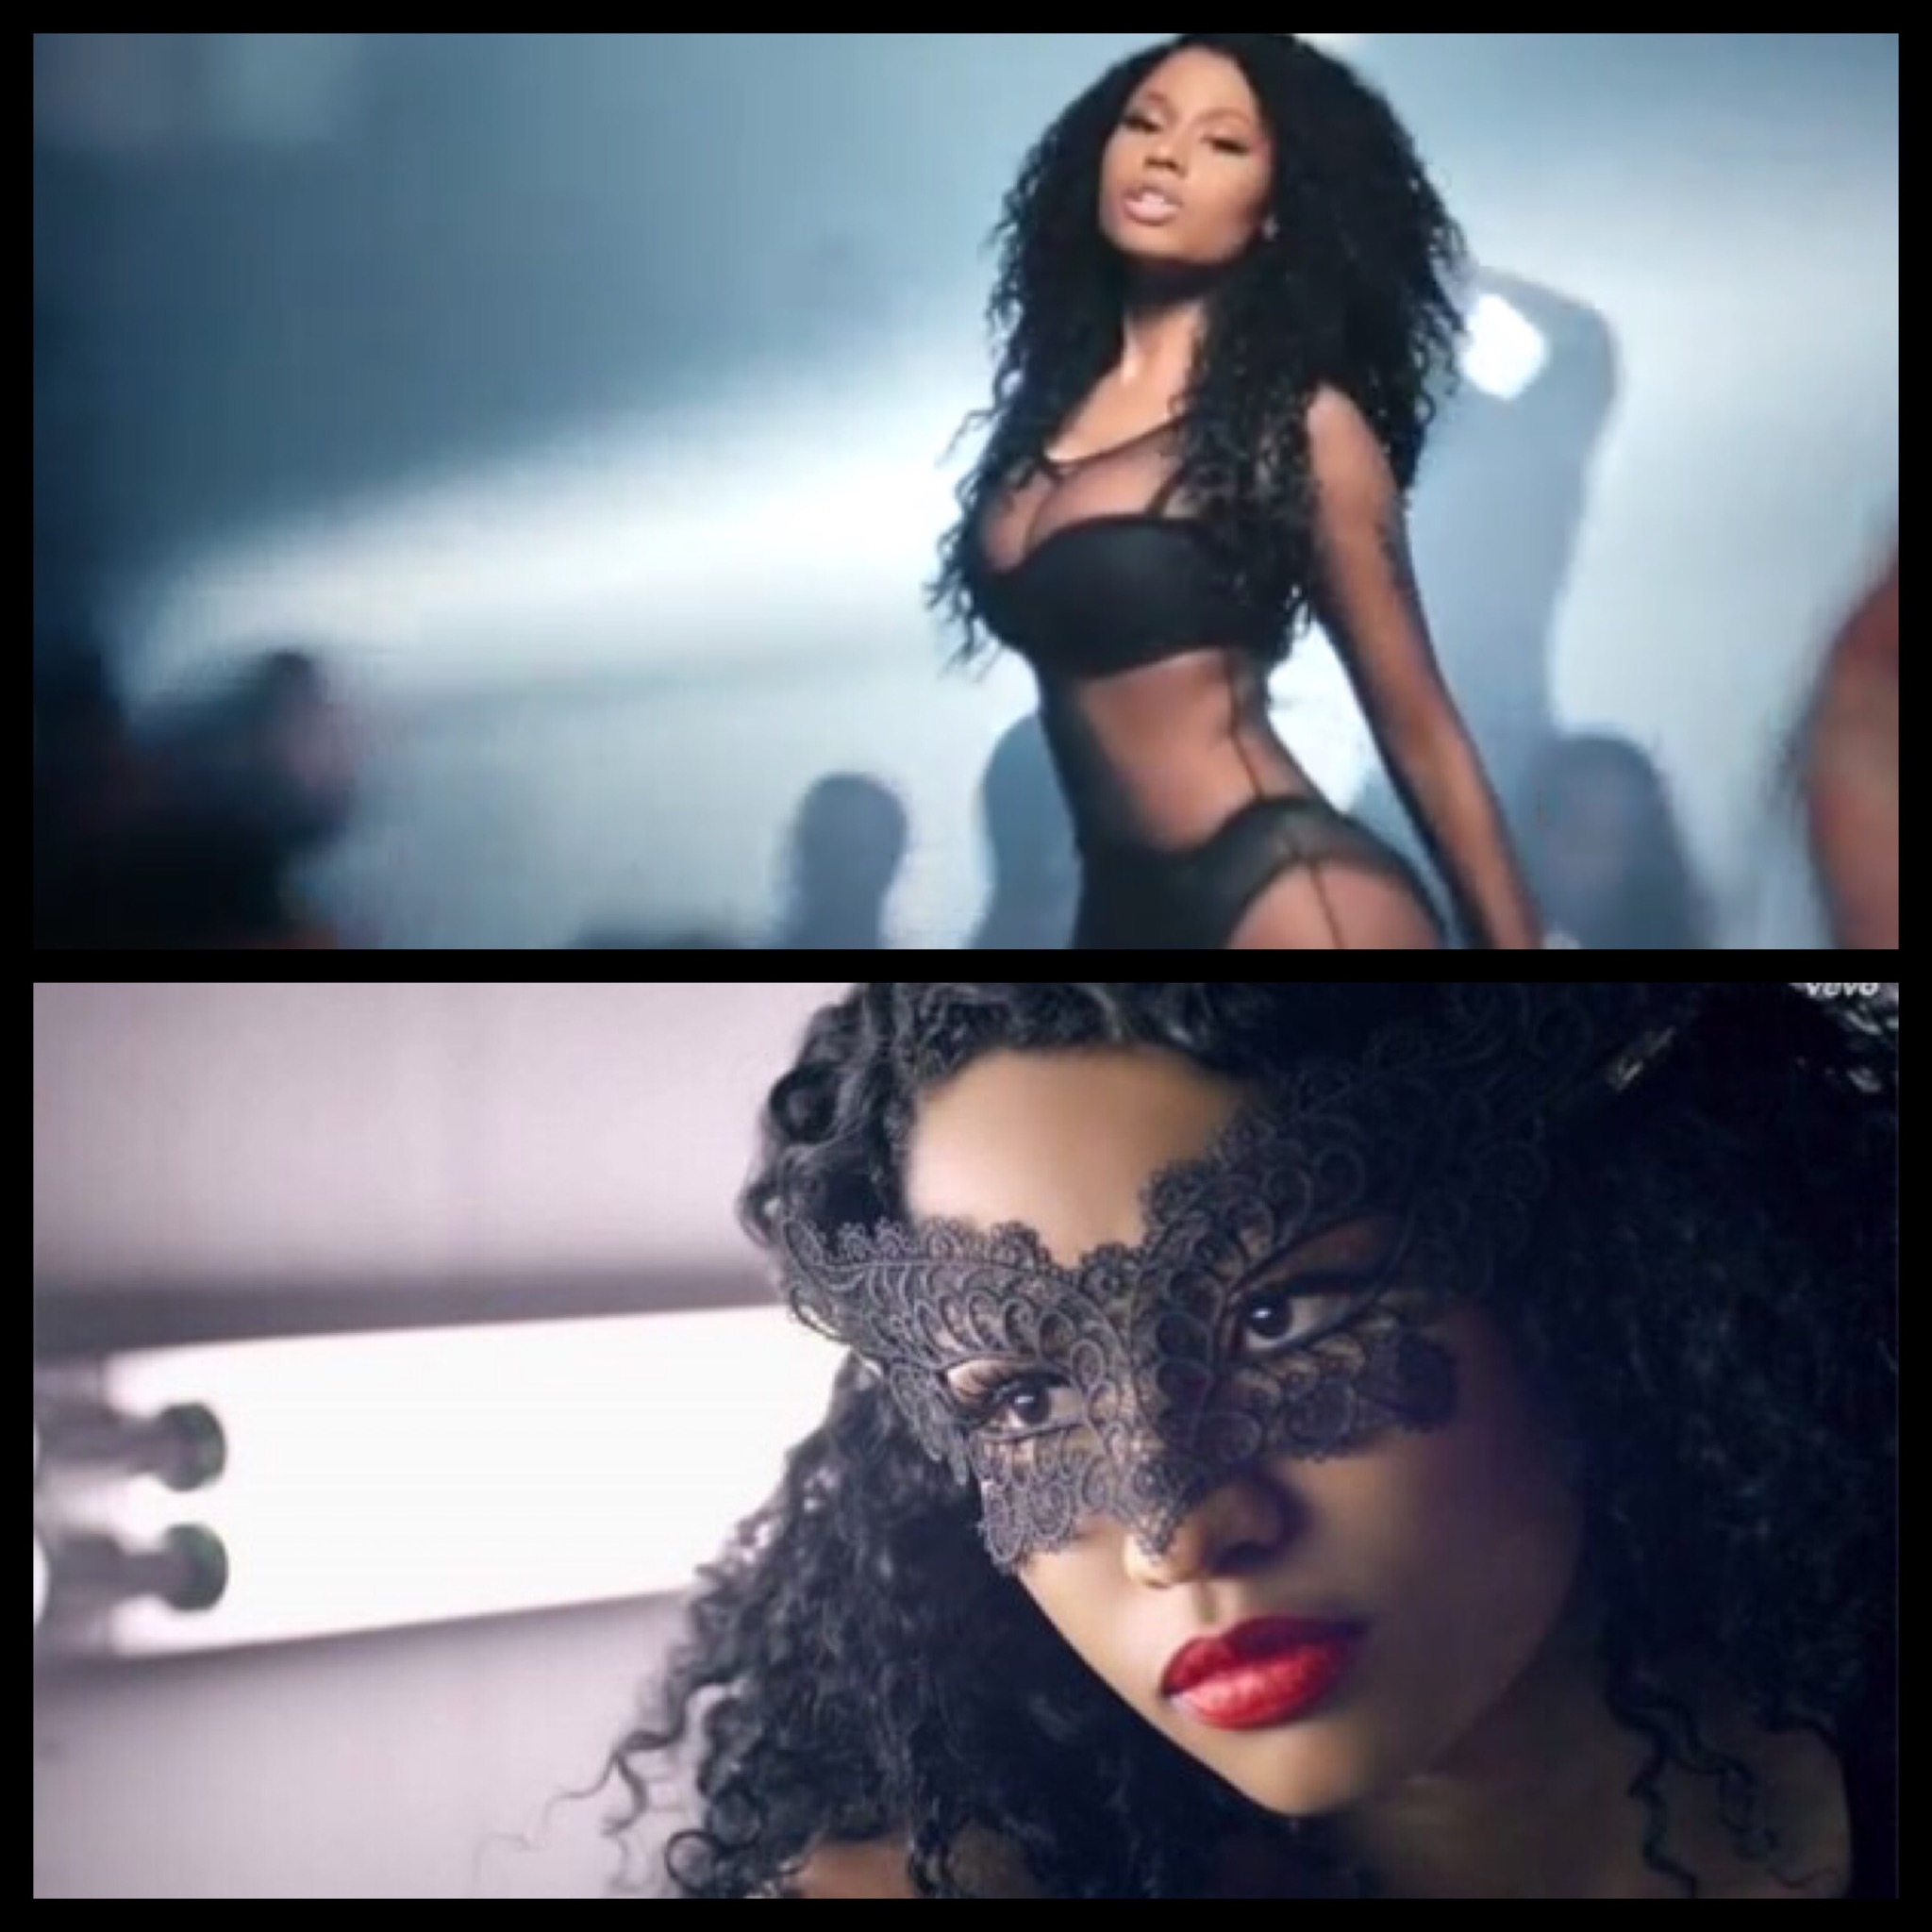 Nicki Minaj Only Official Music Video 15 Seconds of Pop